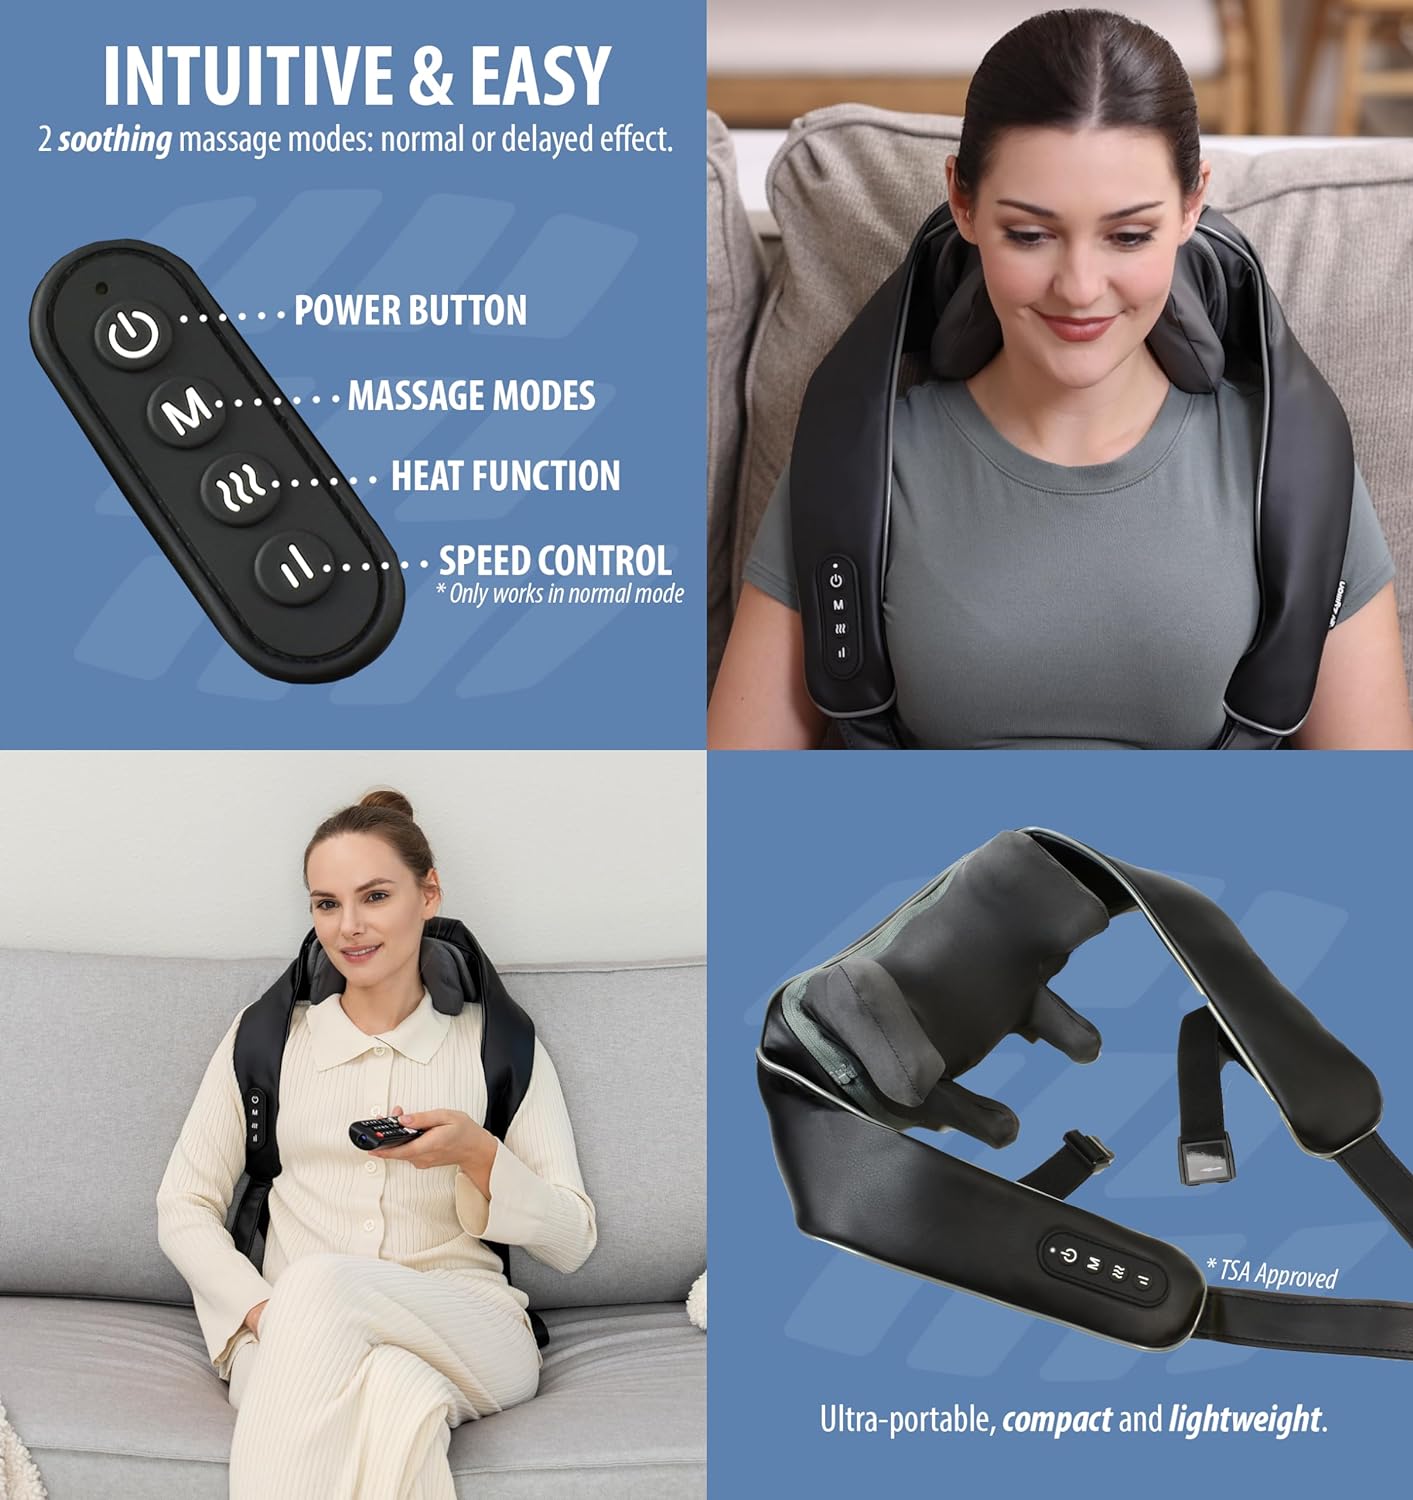 Zyllion Shiatsu Neck and Shoulder Massager with Heat - Cordless Rechargeable 4D Kneading Deep Tissue Massage, Speed Control, 2 Modes for Muscle Pain Relief on Back, Legs, Foot - Black (ZMA-36)